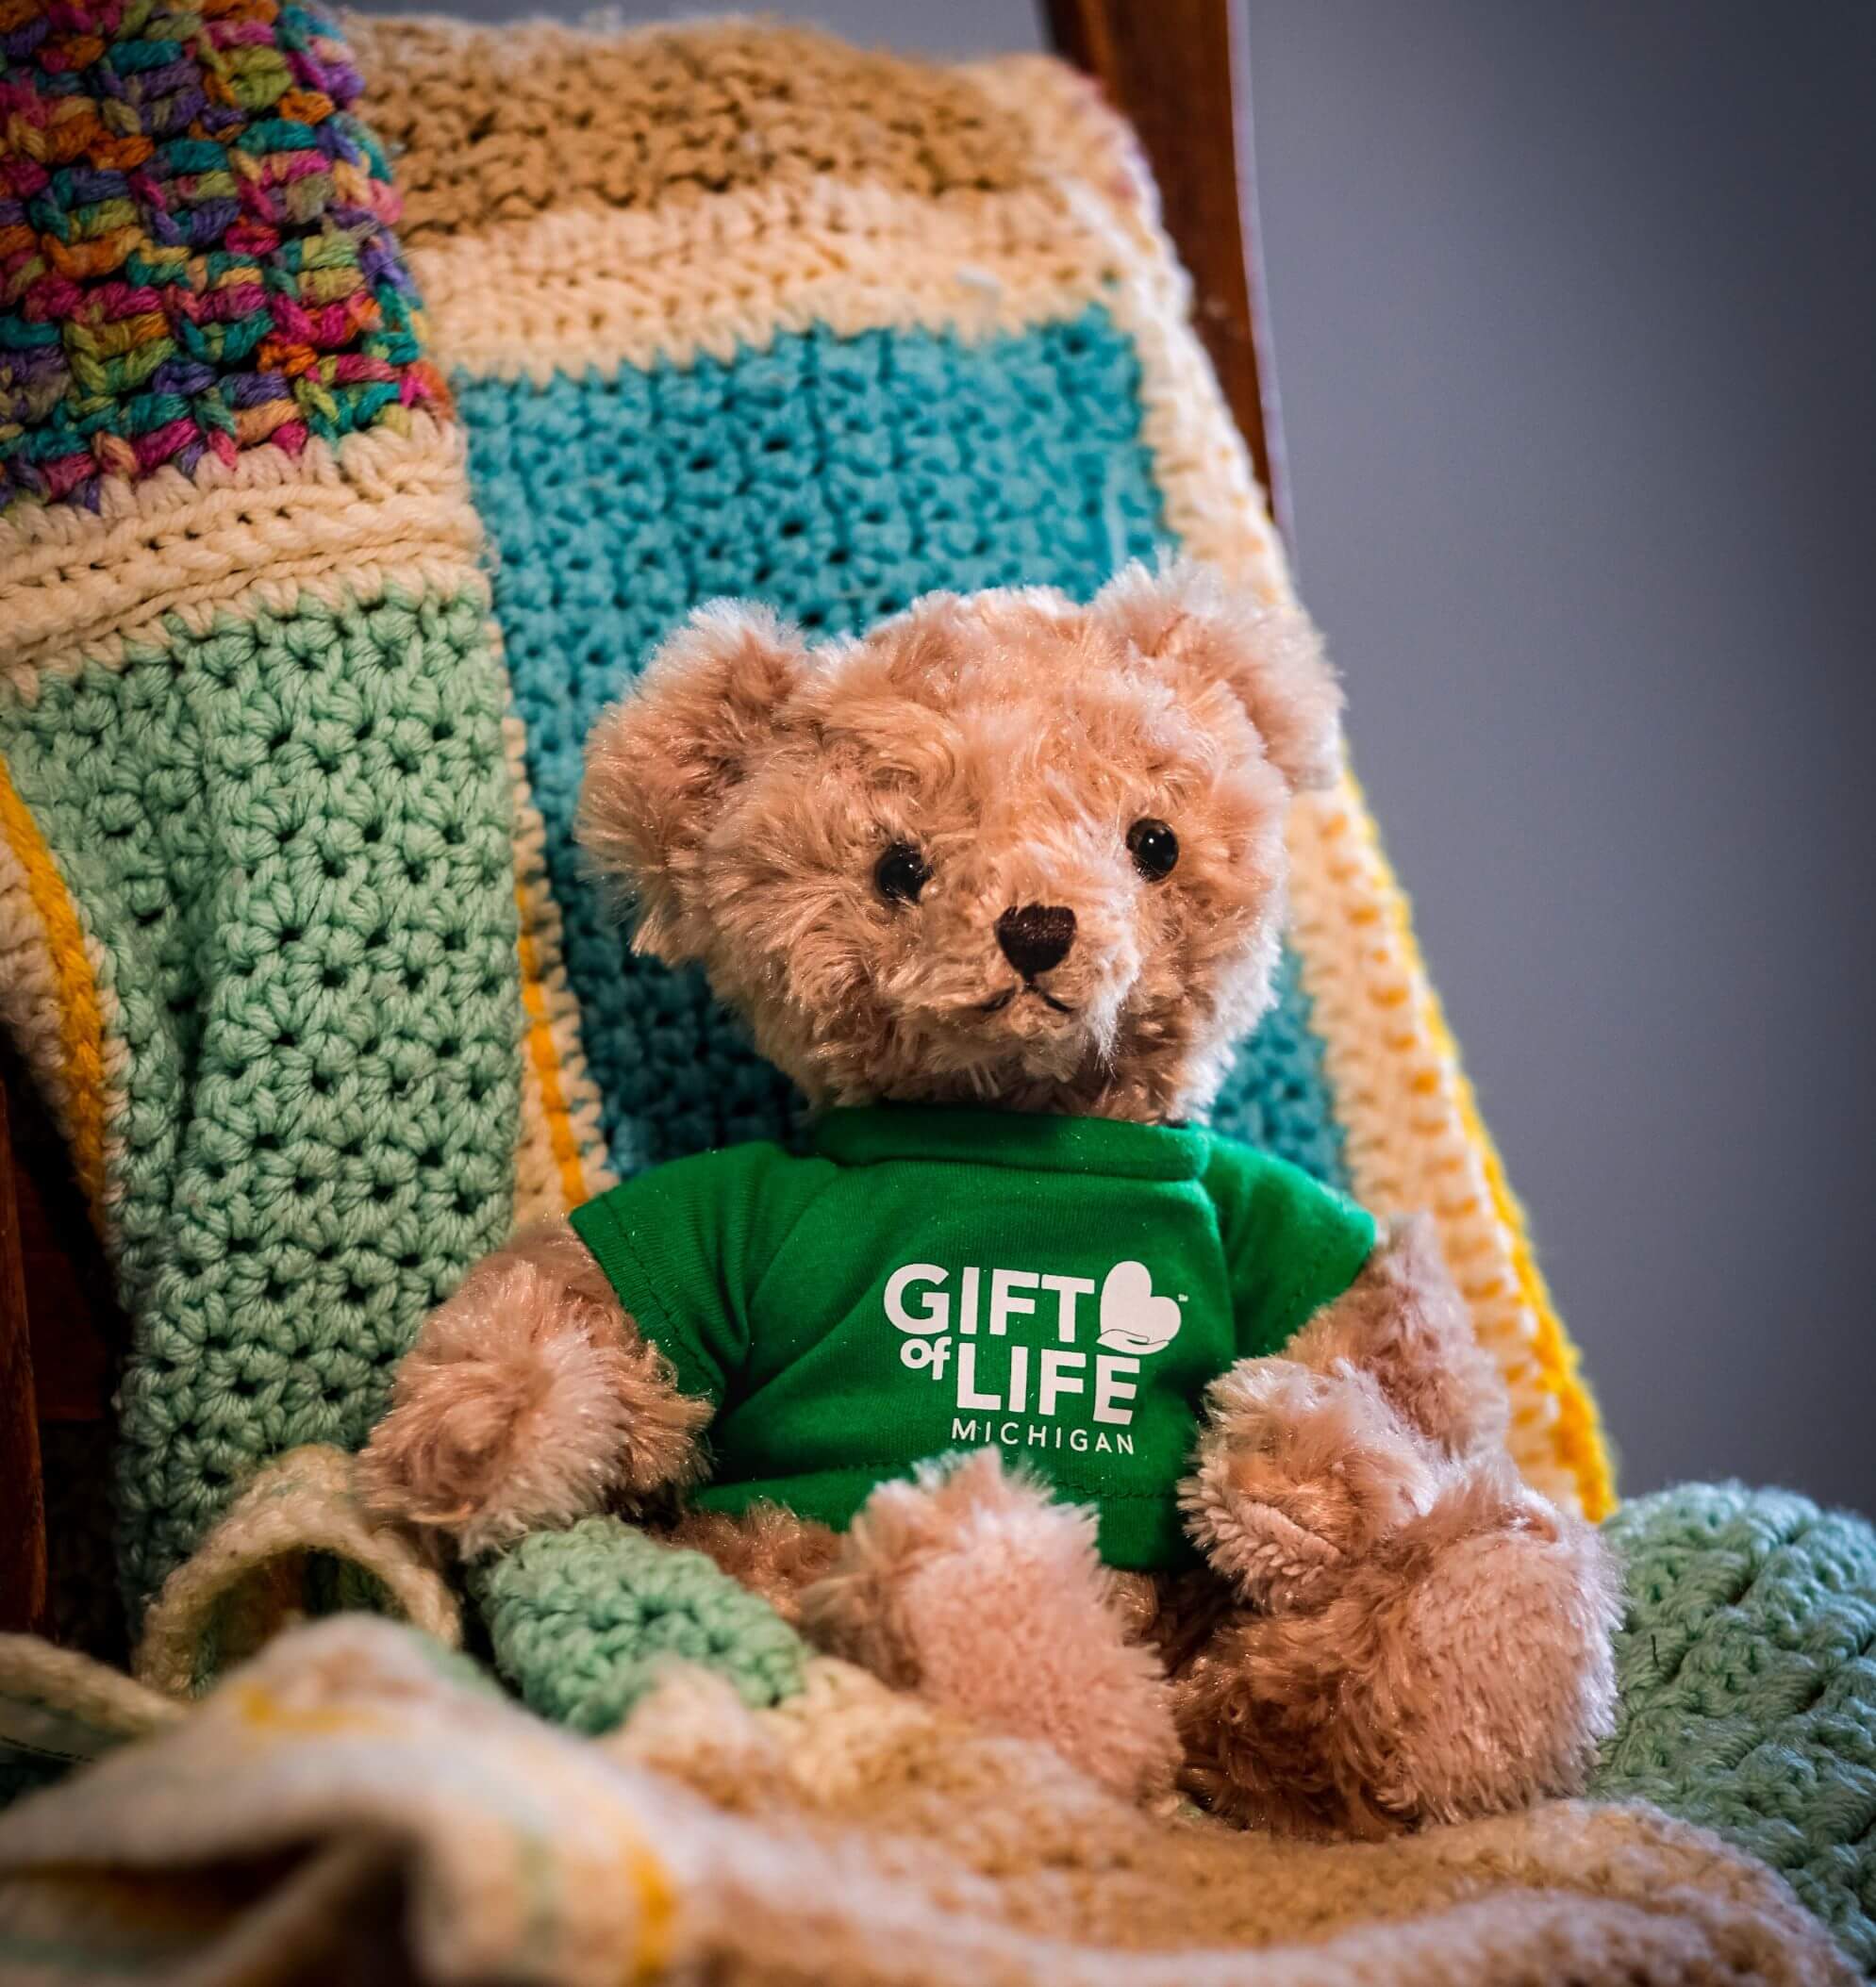 Teddy bear wearing green Gift of Life t-shirt on a homemade afghan blanket